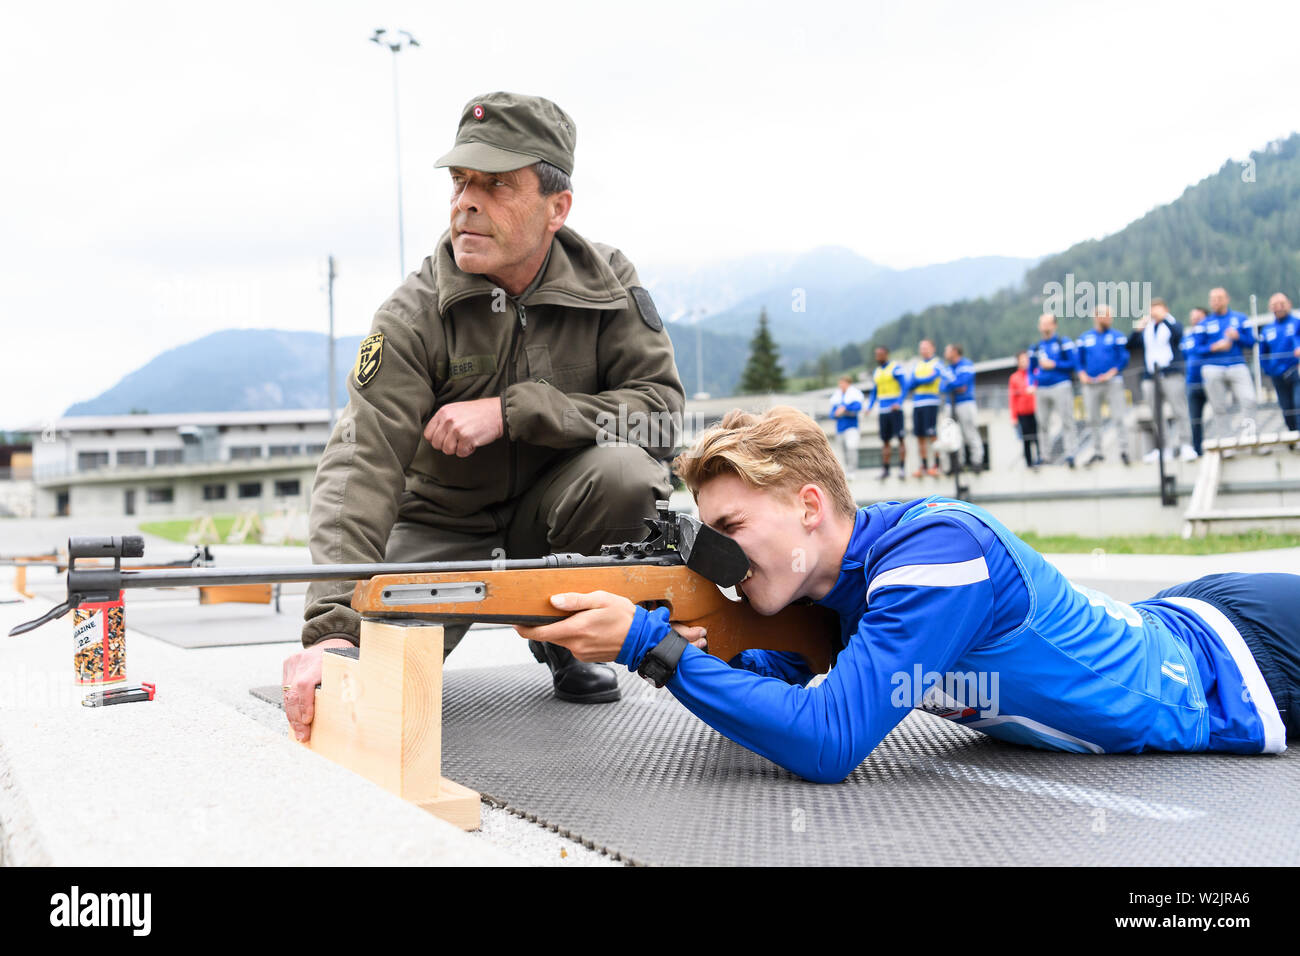 Teambuilding at afterwithtag in biathlon stadium. Dominik Kother (KSC) at the shooting range. GES/football/2nd Bundesliga: training camp of the Karlsruhe Sports Club in Waidring, 07/09/2019 Football/Soccer: 2nd League: training camp Karlsruher SC, Waidring, Austria, July 9, 2019 | usage worldwide Stock Photo